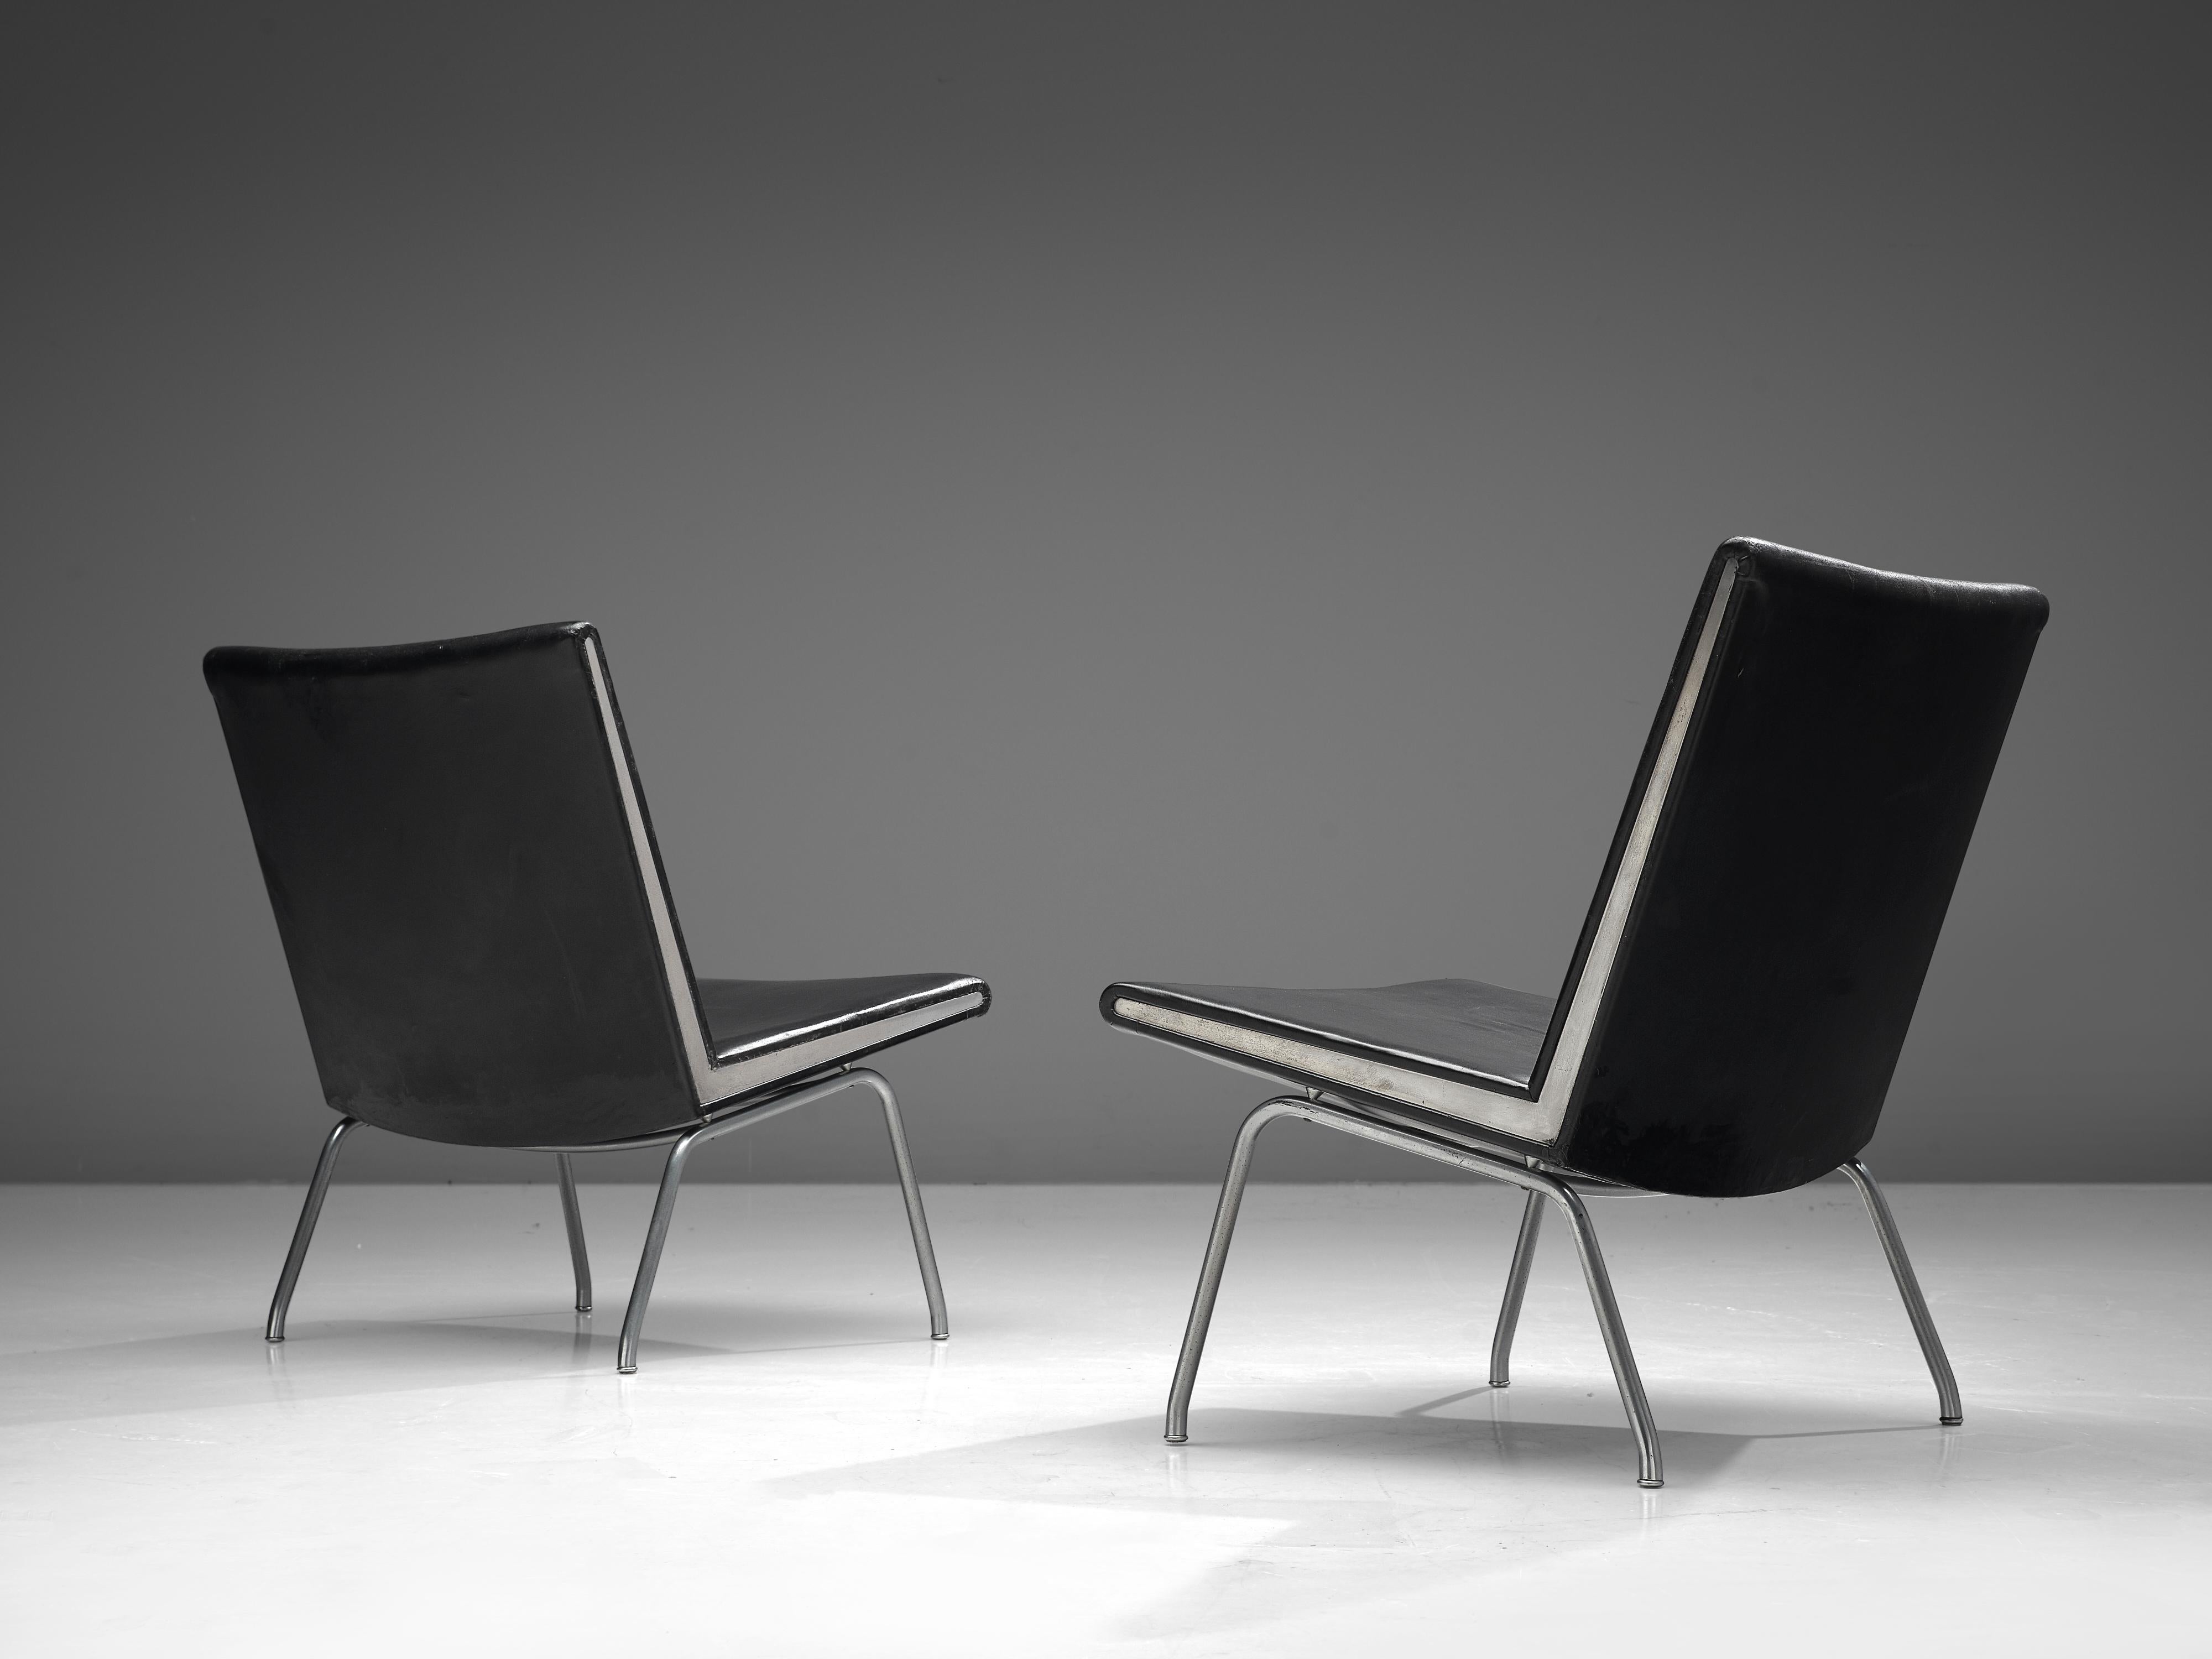 Hans J. Wegner, set of two Airport lounge chairs, leather and metal, Denmark, 1958.

This pair of Airport chairs are designed by Hans Wegner in 1958. Although not specifically designed for airports, the chair thanks its name to the Copenhagen's